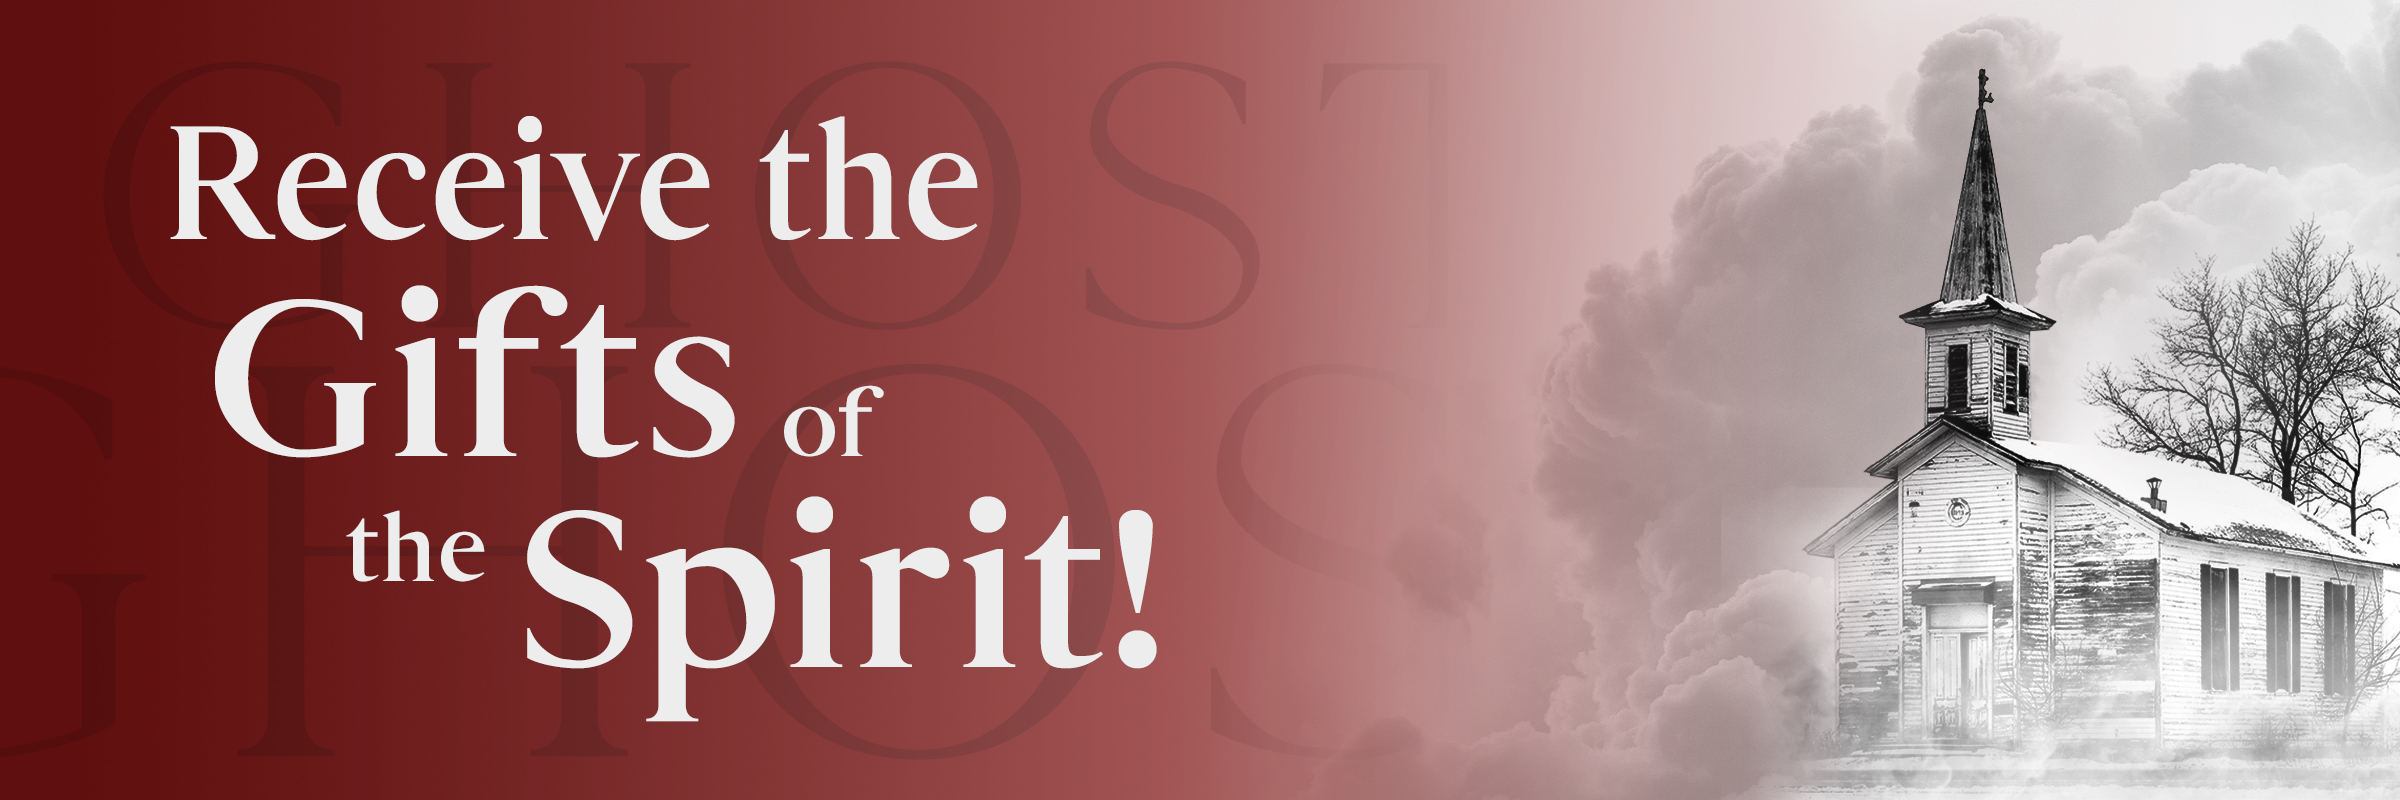 Receive the gifts of the Spirit!